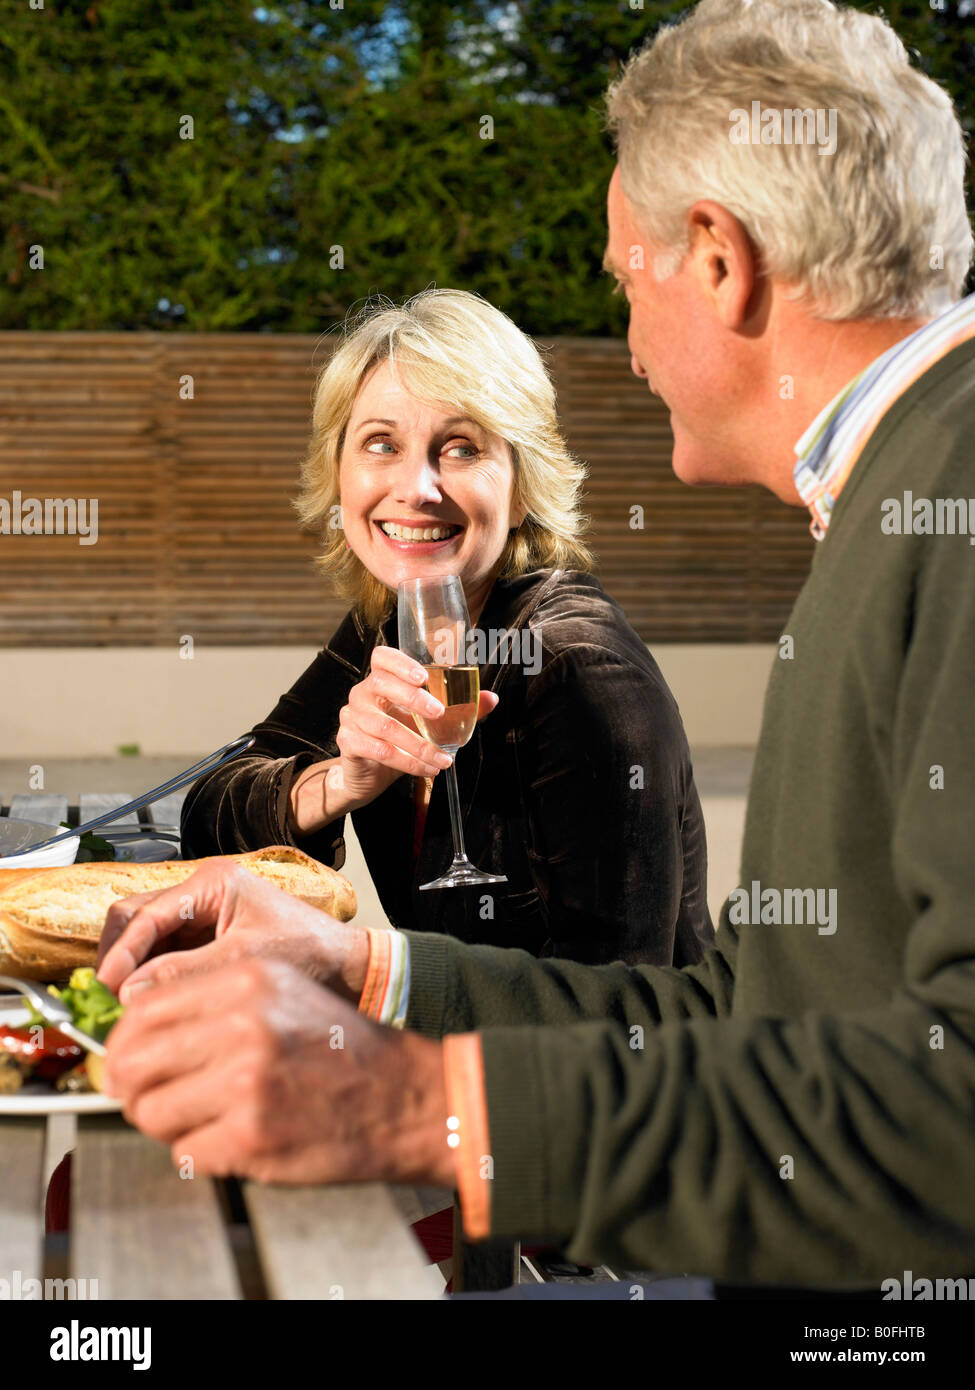 Senior couple eating meal outdoors Banque D'Images